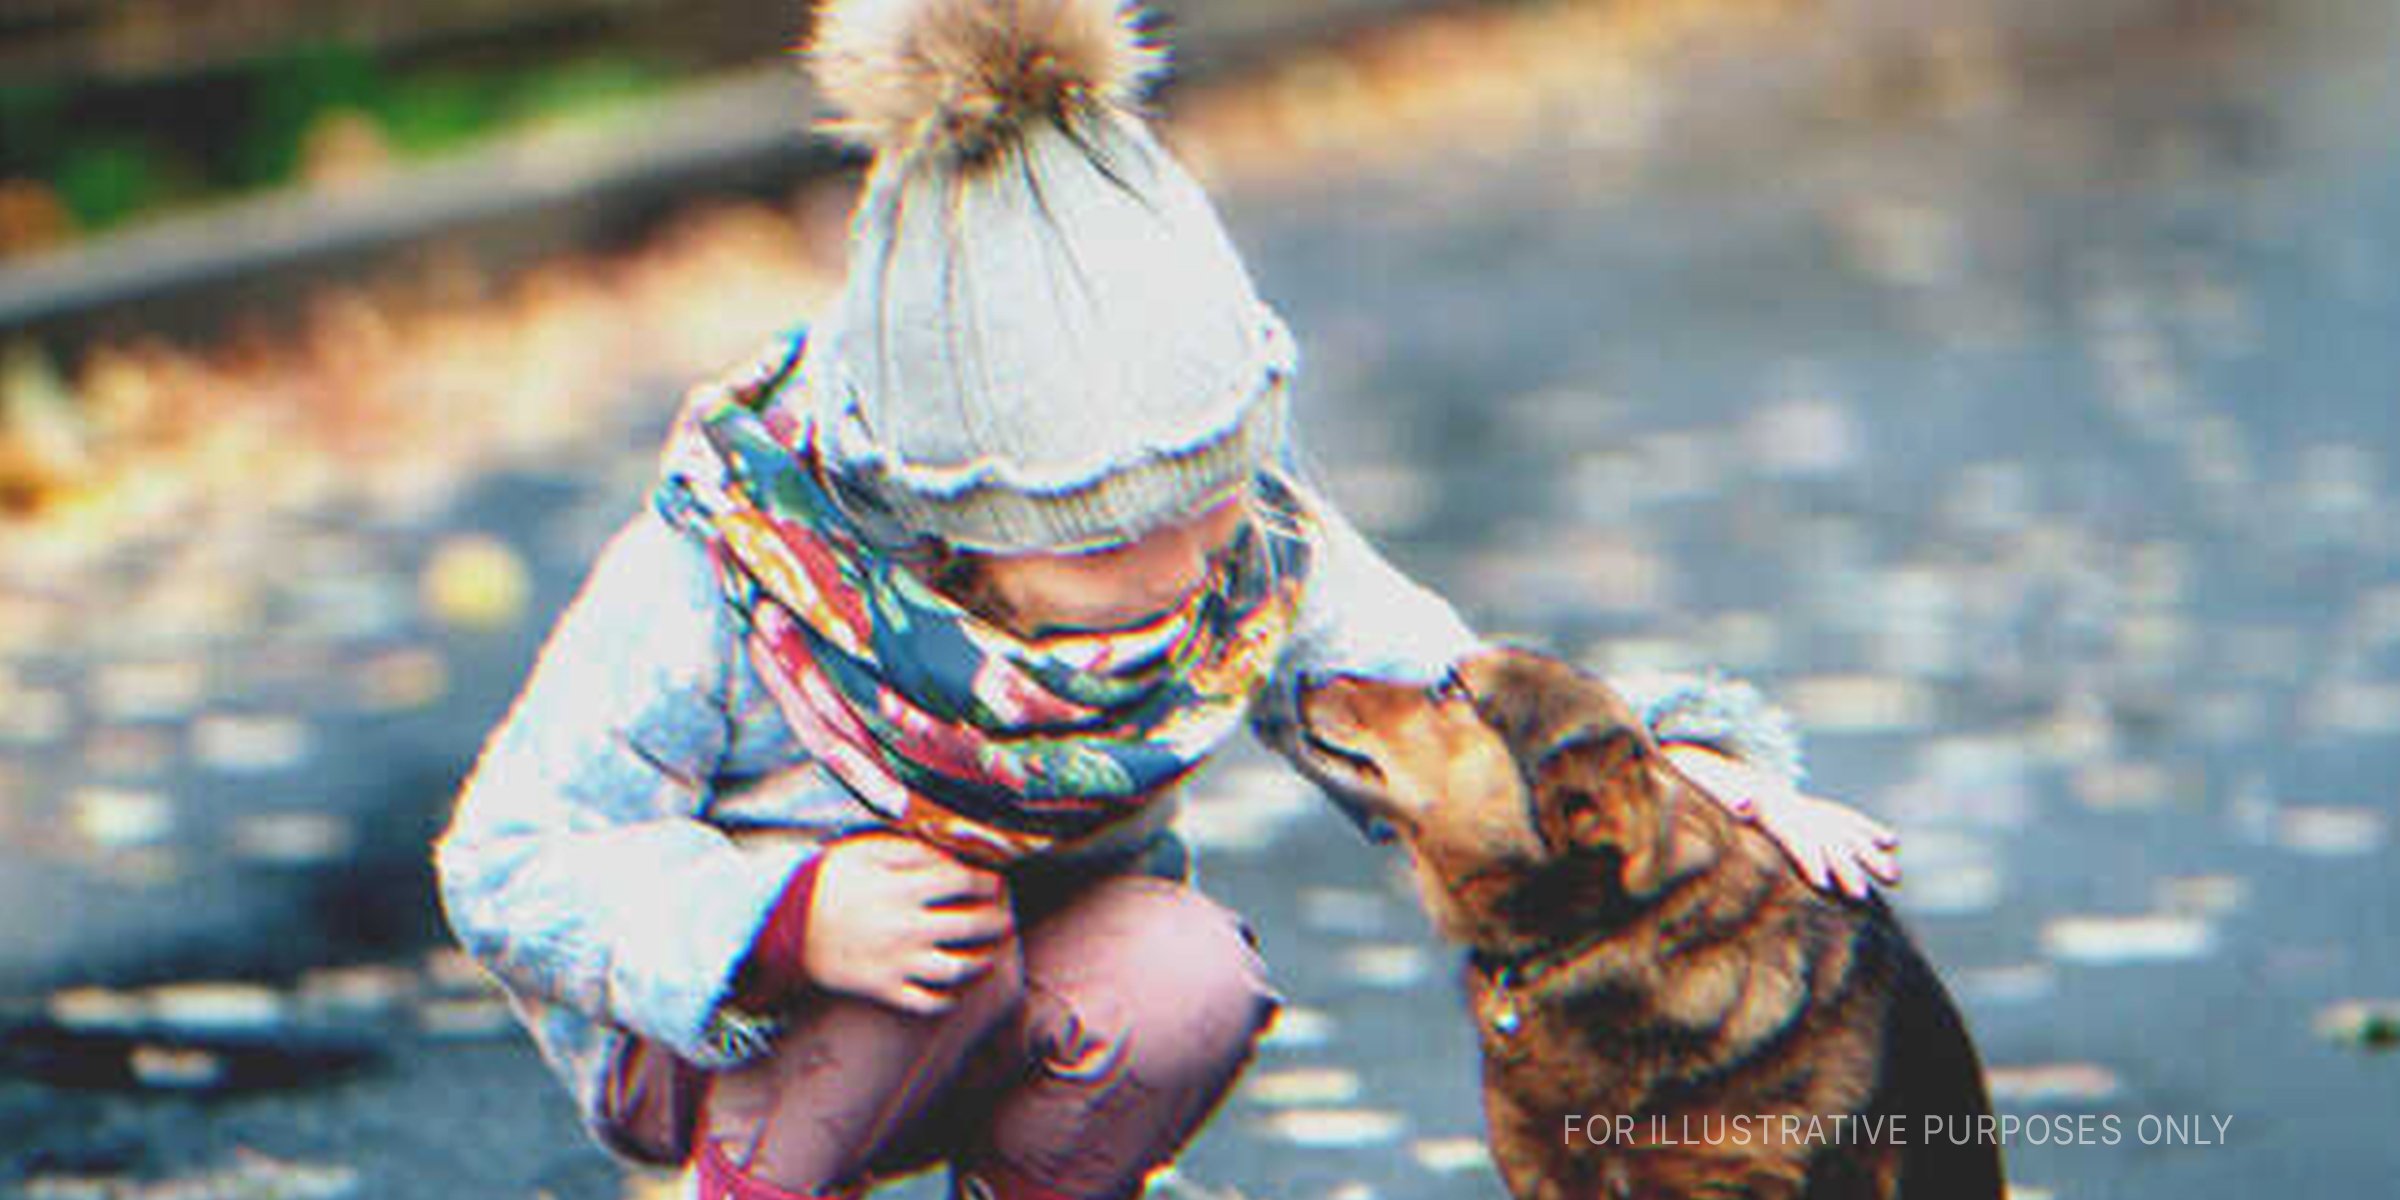 A girl and a dog | Source: Shutterstock